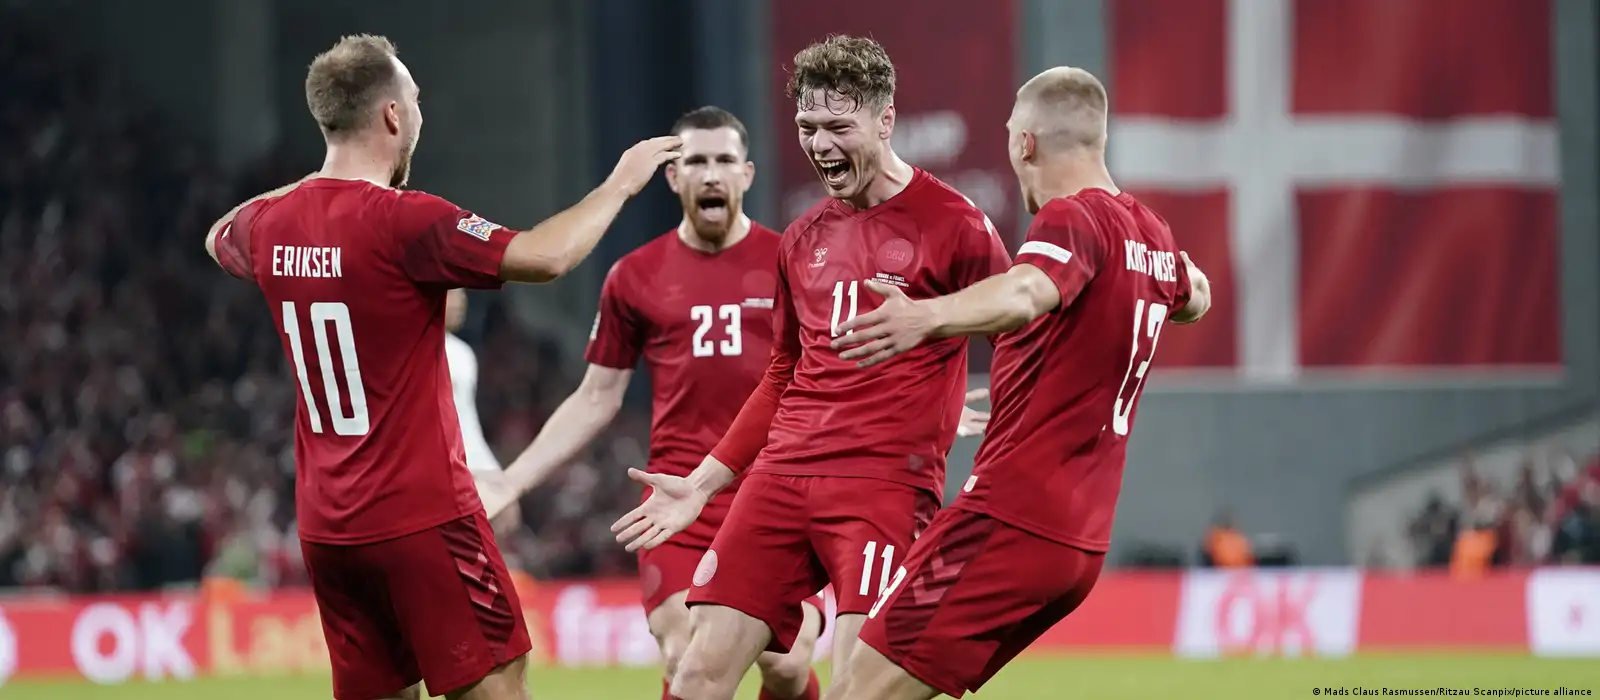 Denmark's Toned-Down World Cup Jerseys Are Designed to Protest Host Country  Qatar